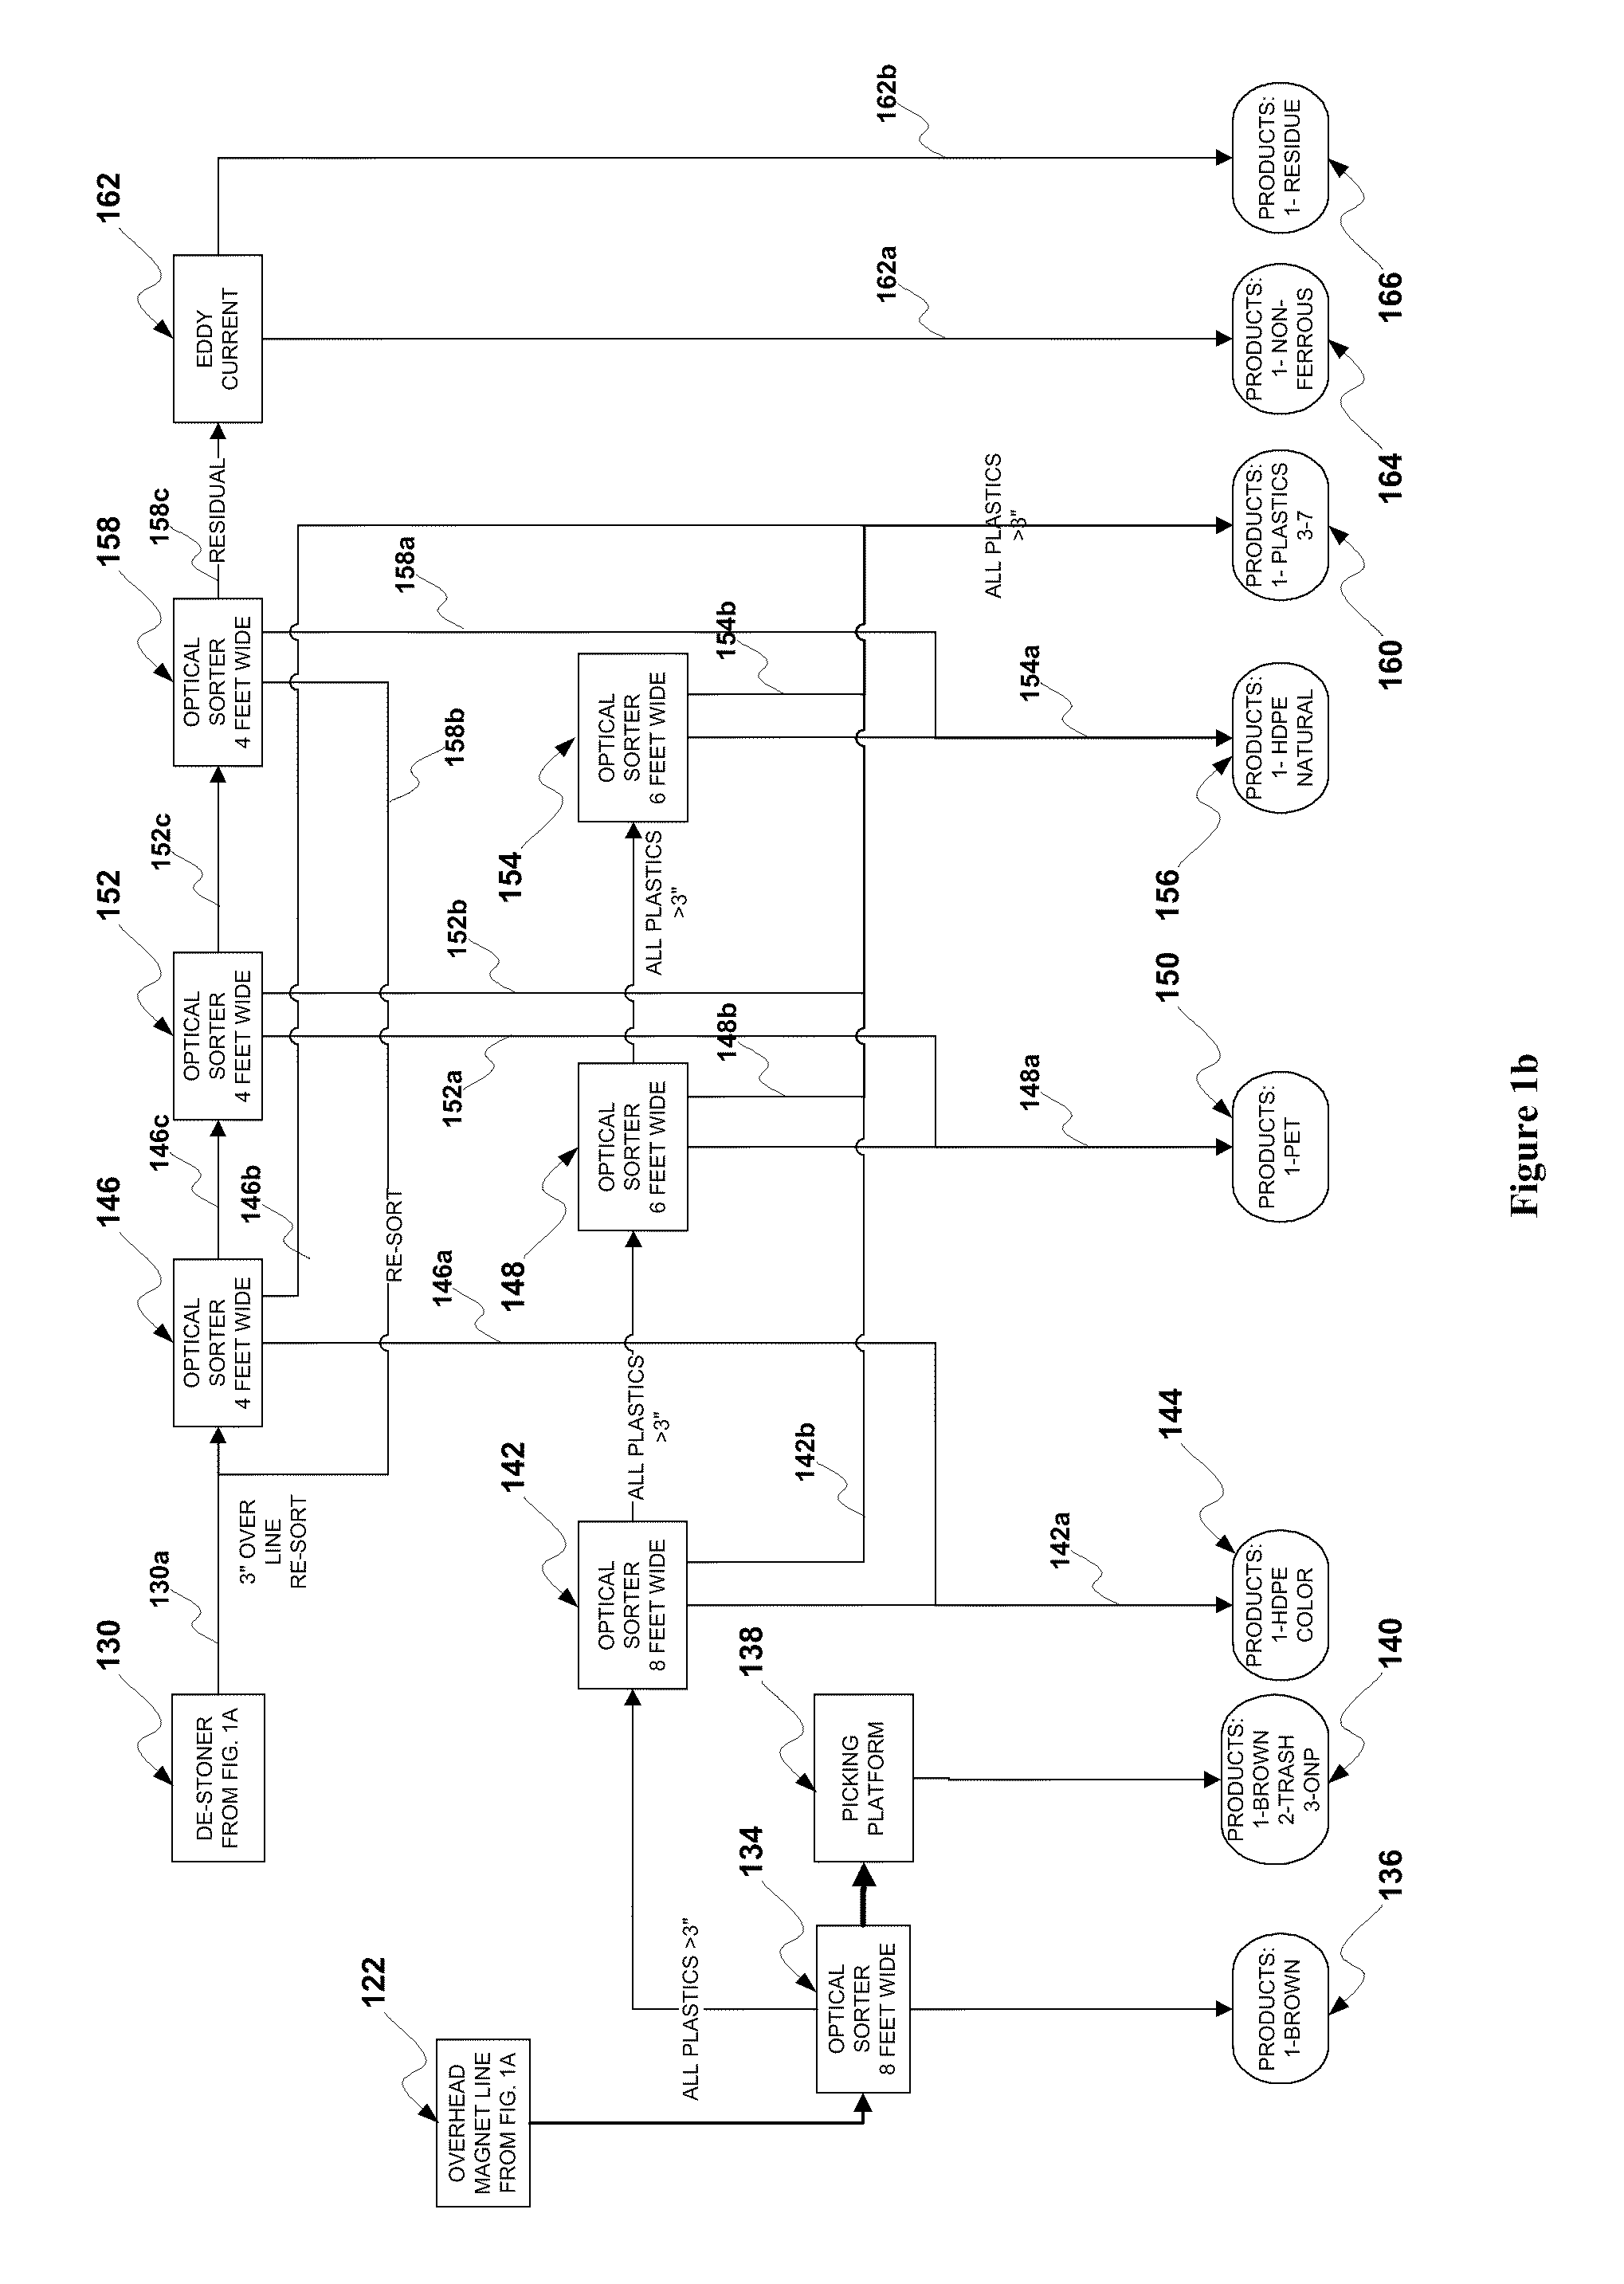 System and Method for Integrated Waste Storage